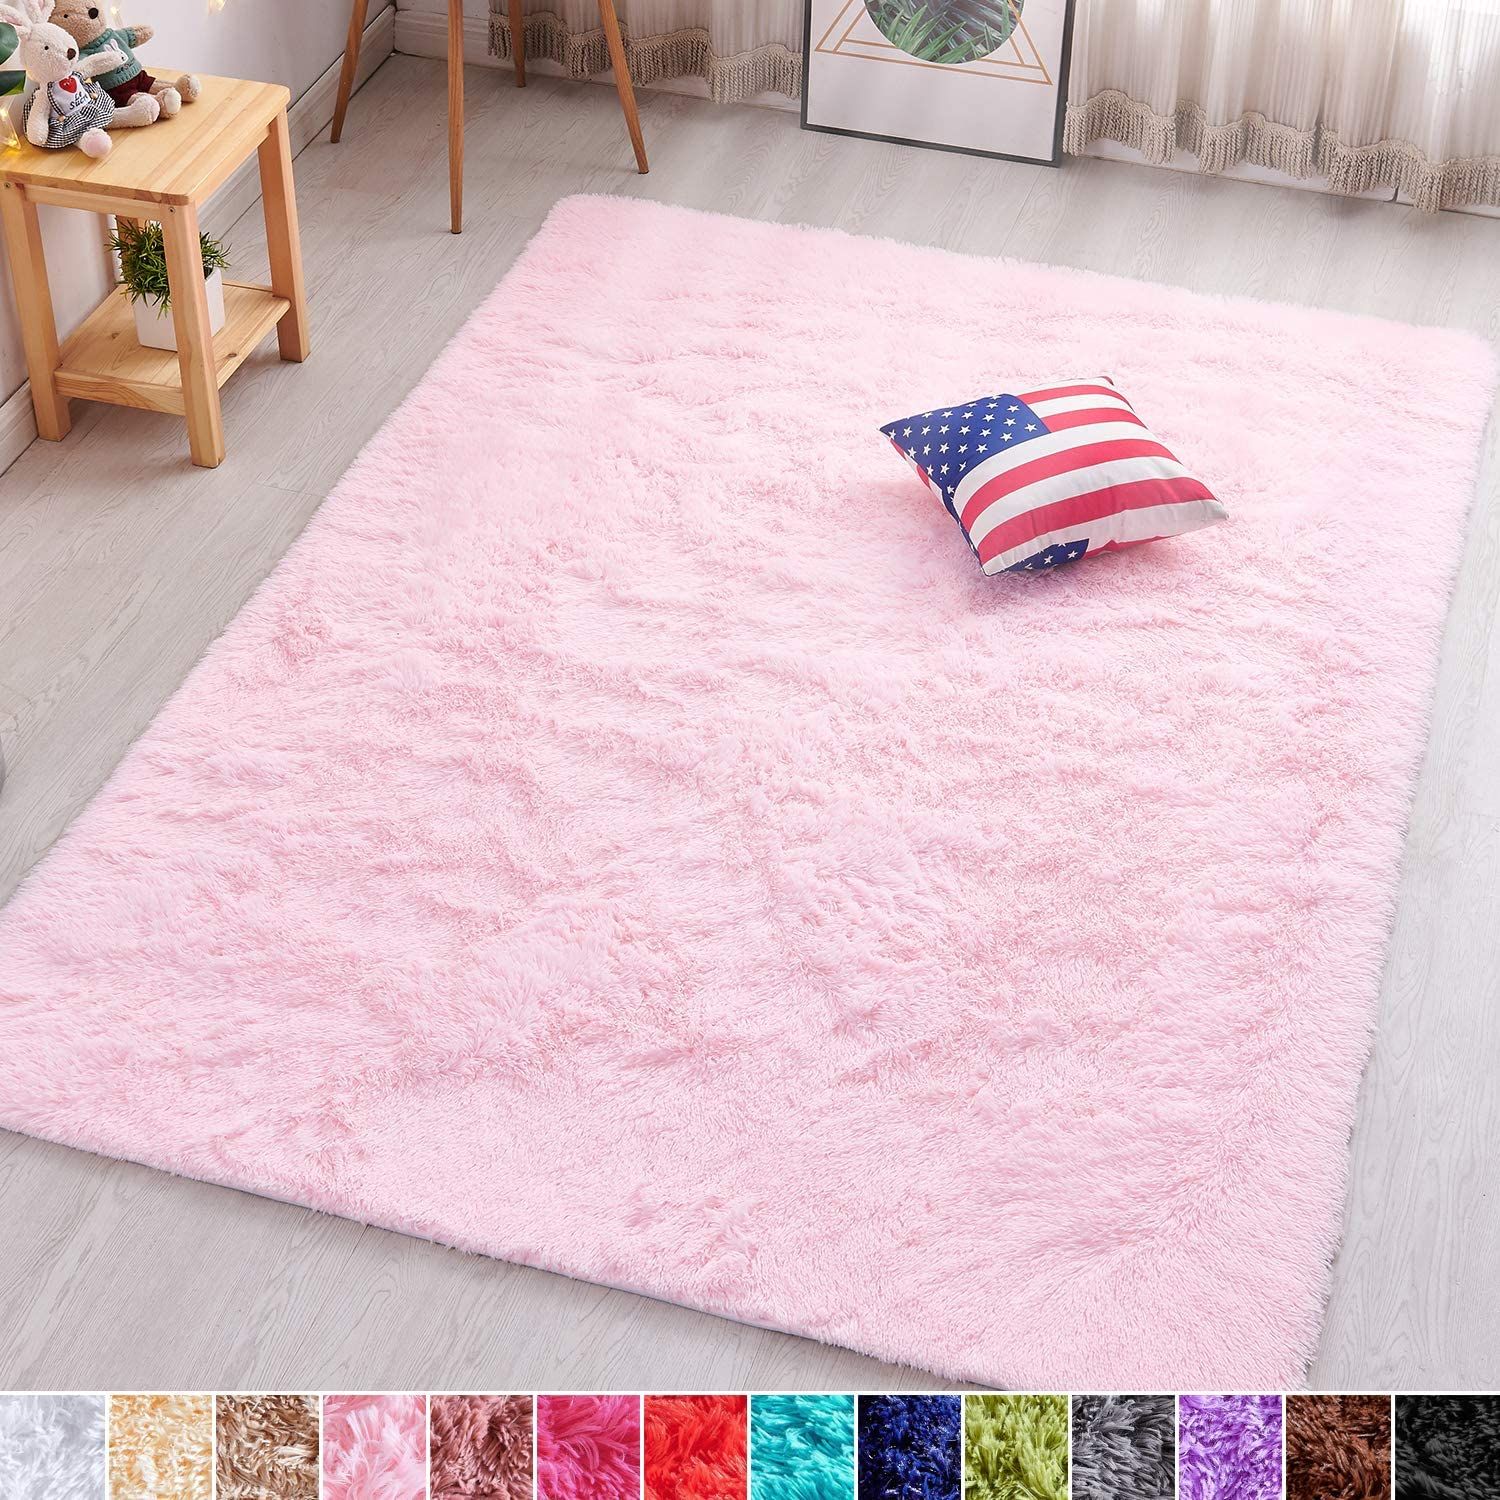 Pagisofe Pink Fluffy Shag Area Rugs For Bedroom 5x7, Soft Fuzzy Shaggy Rugs  For Living Room Carpet Nursery Floor Girls Room Dorm Rug – Walmart With Regard To Light Pink Rugs (Photo 13 of 15)